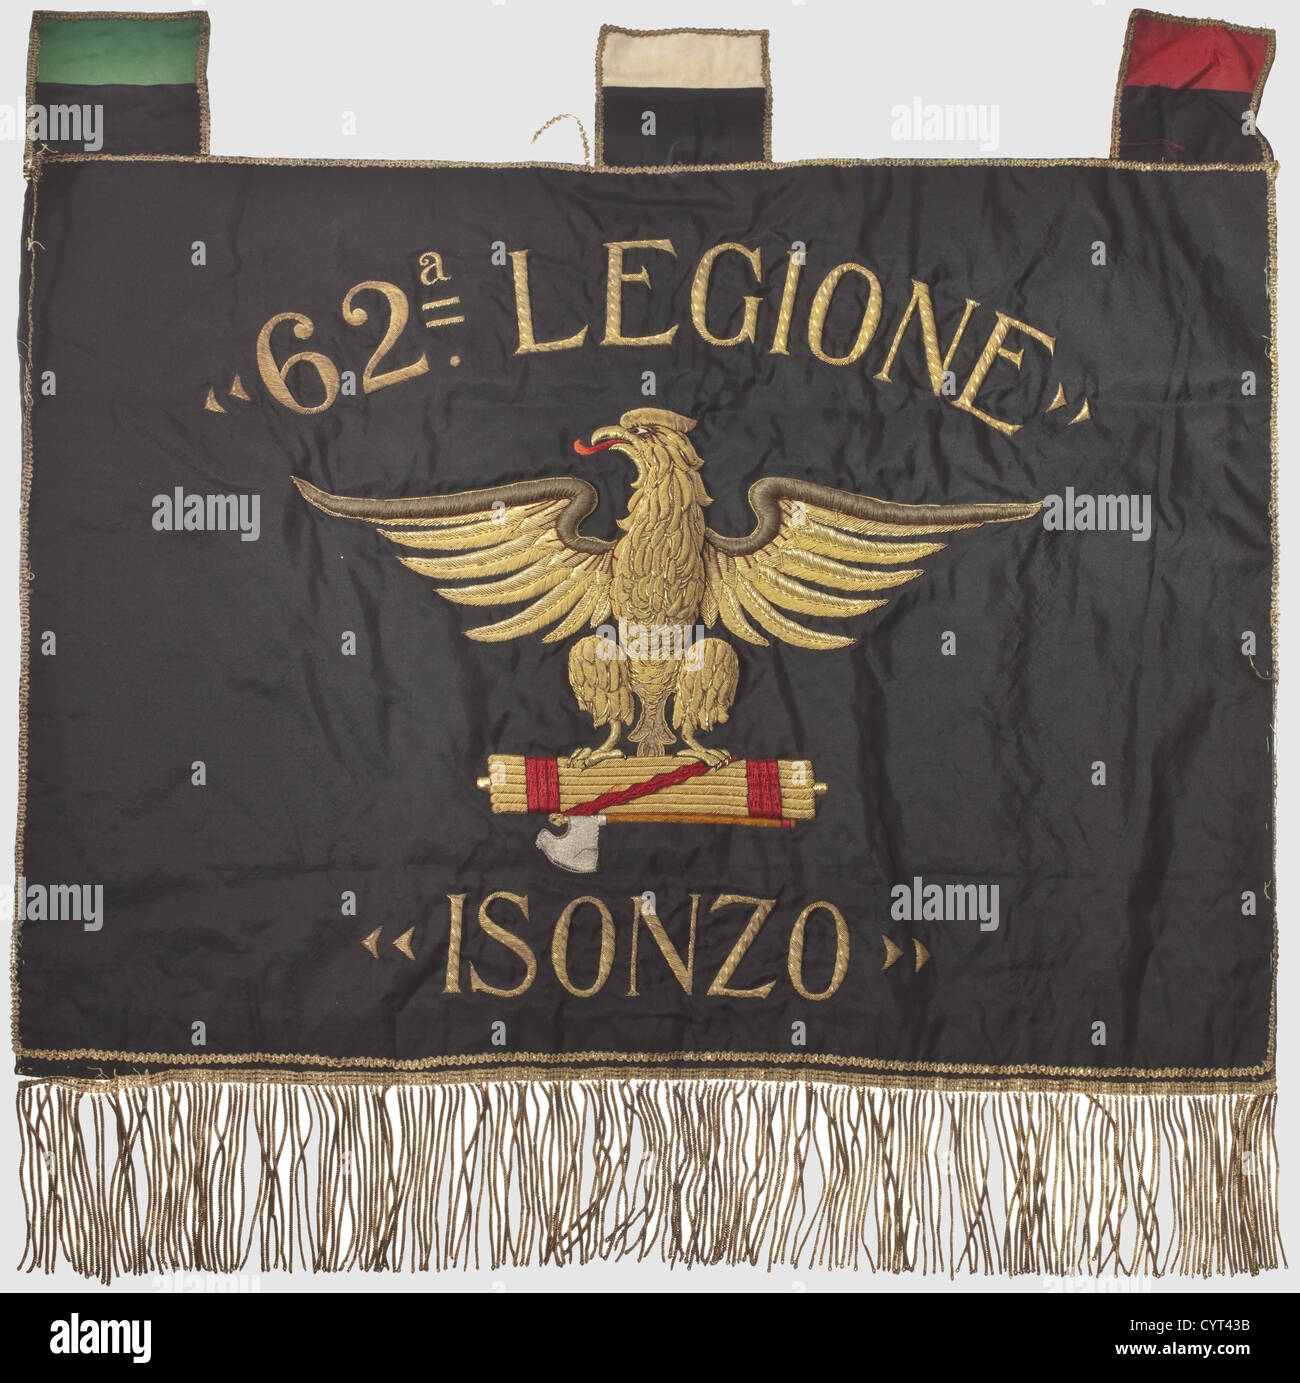 An Italian MVSN Black Shirt Banner,for the 62nd "Isonzo" Legion The front  is of black standart cloth displaying "62 LEGIONE ISONZO" and the eagle  with a lictor's bundle in heavy,elaborate gold  embroidery.Unfortunately,there